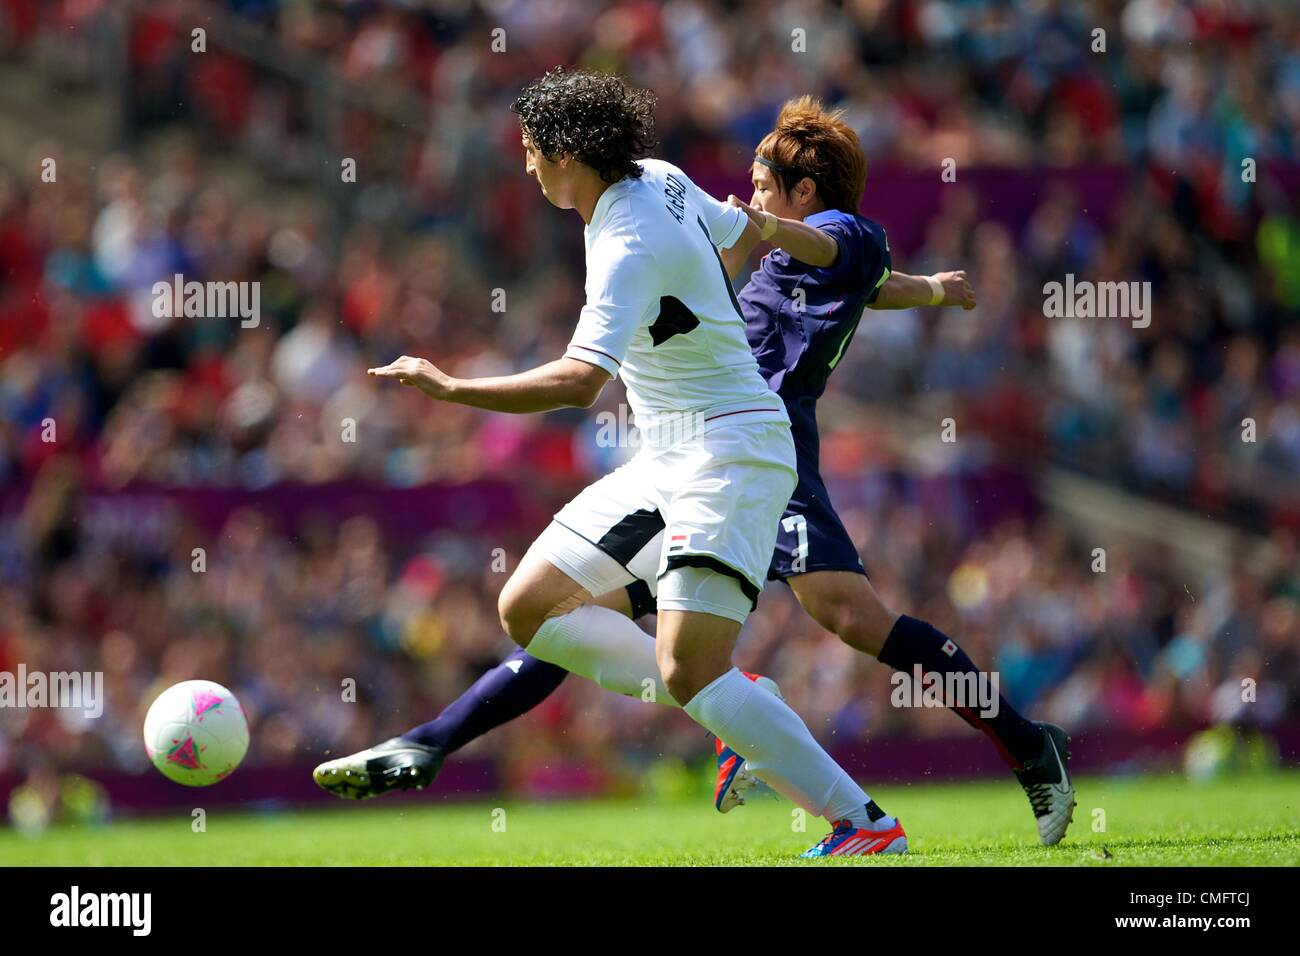 UK. 04.08.2012 Manchester, England. Japan forward Yuki Otsu and Egypt defender Ahmed Hegazy in action during the quarter final match between Japan and Egypt at Old Trafford. Japan won the game by a score of 3-0 to proceed to the tournament semi-finals. Stock Photo